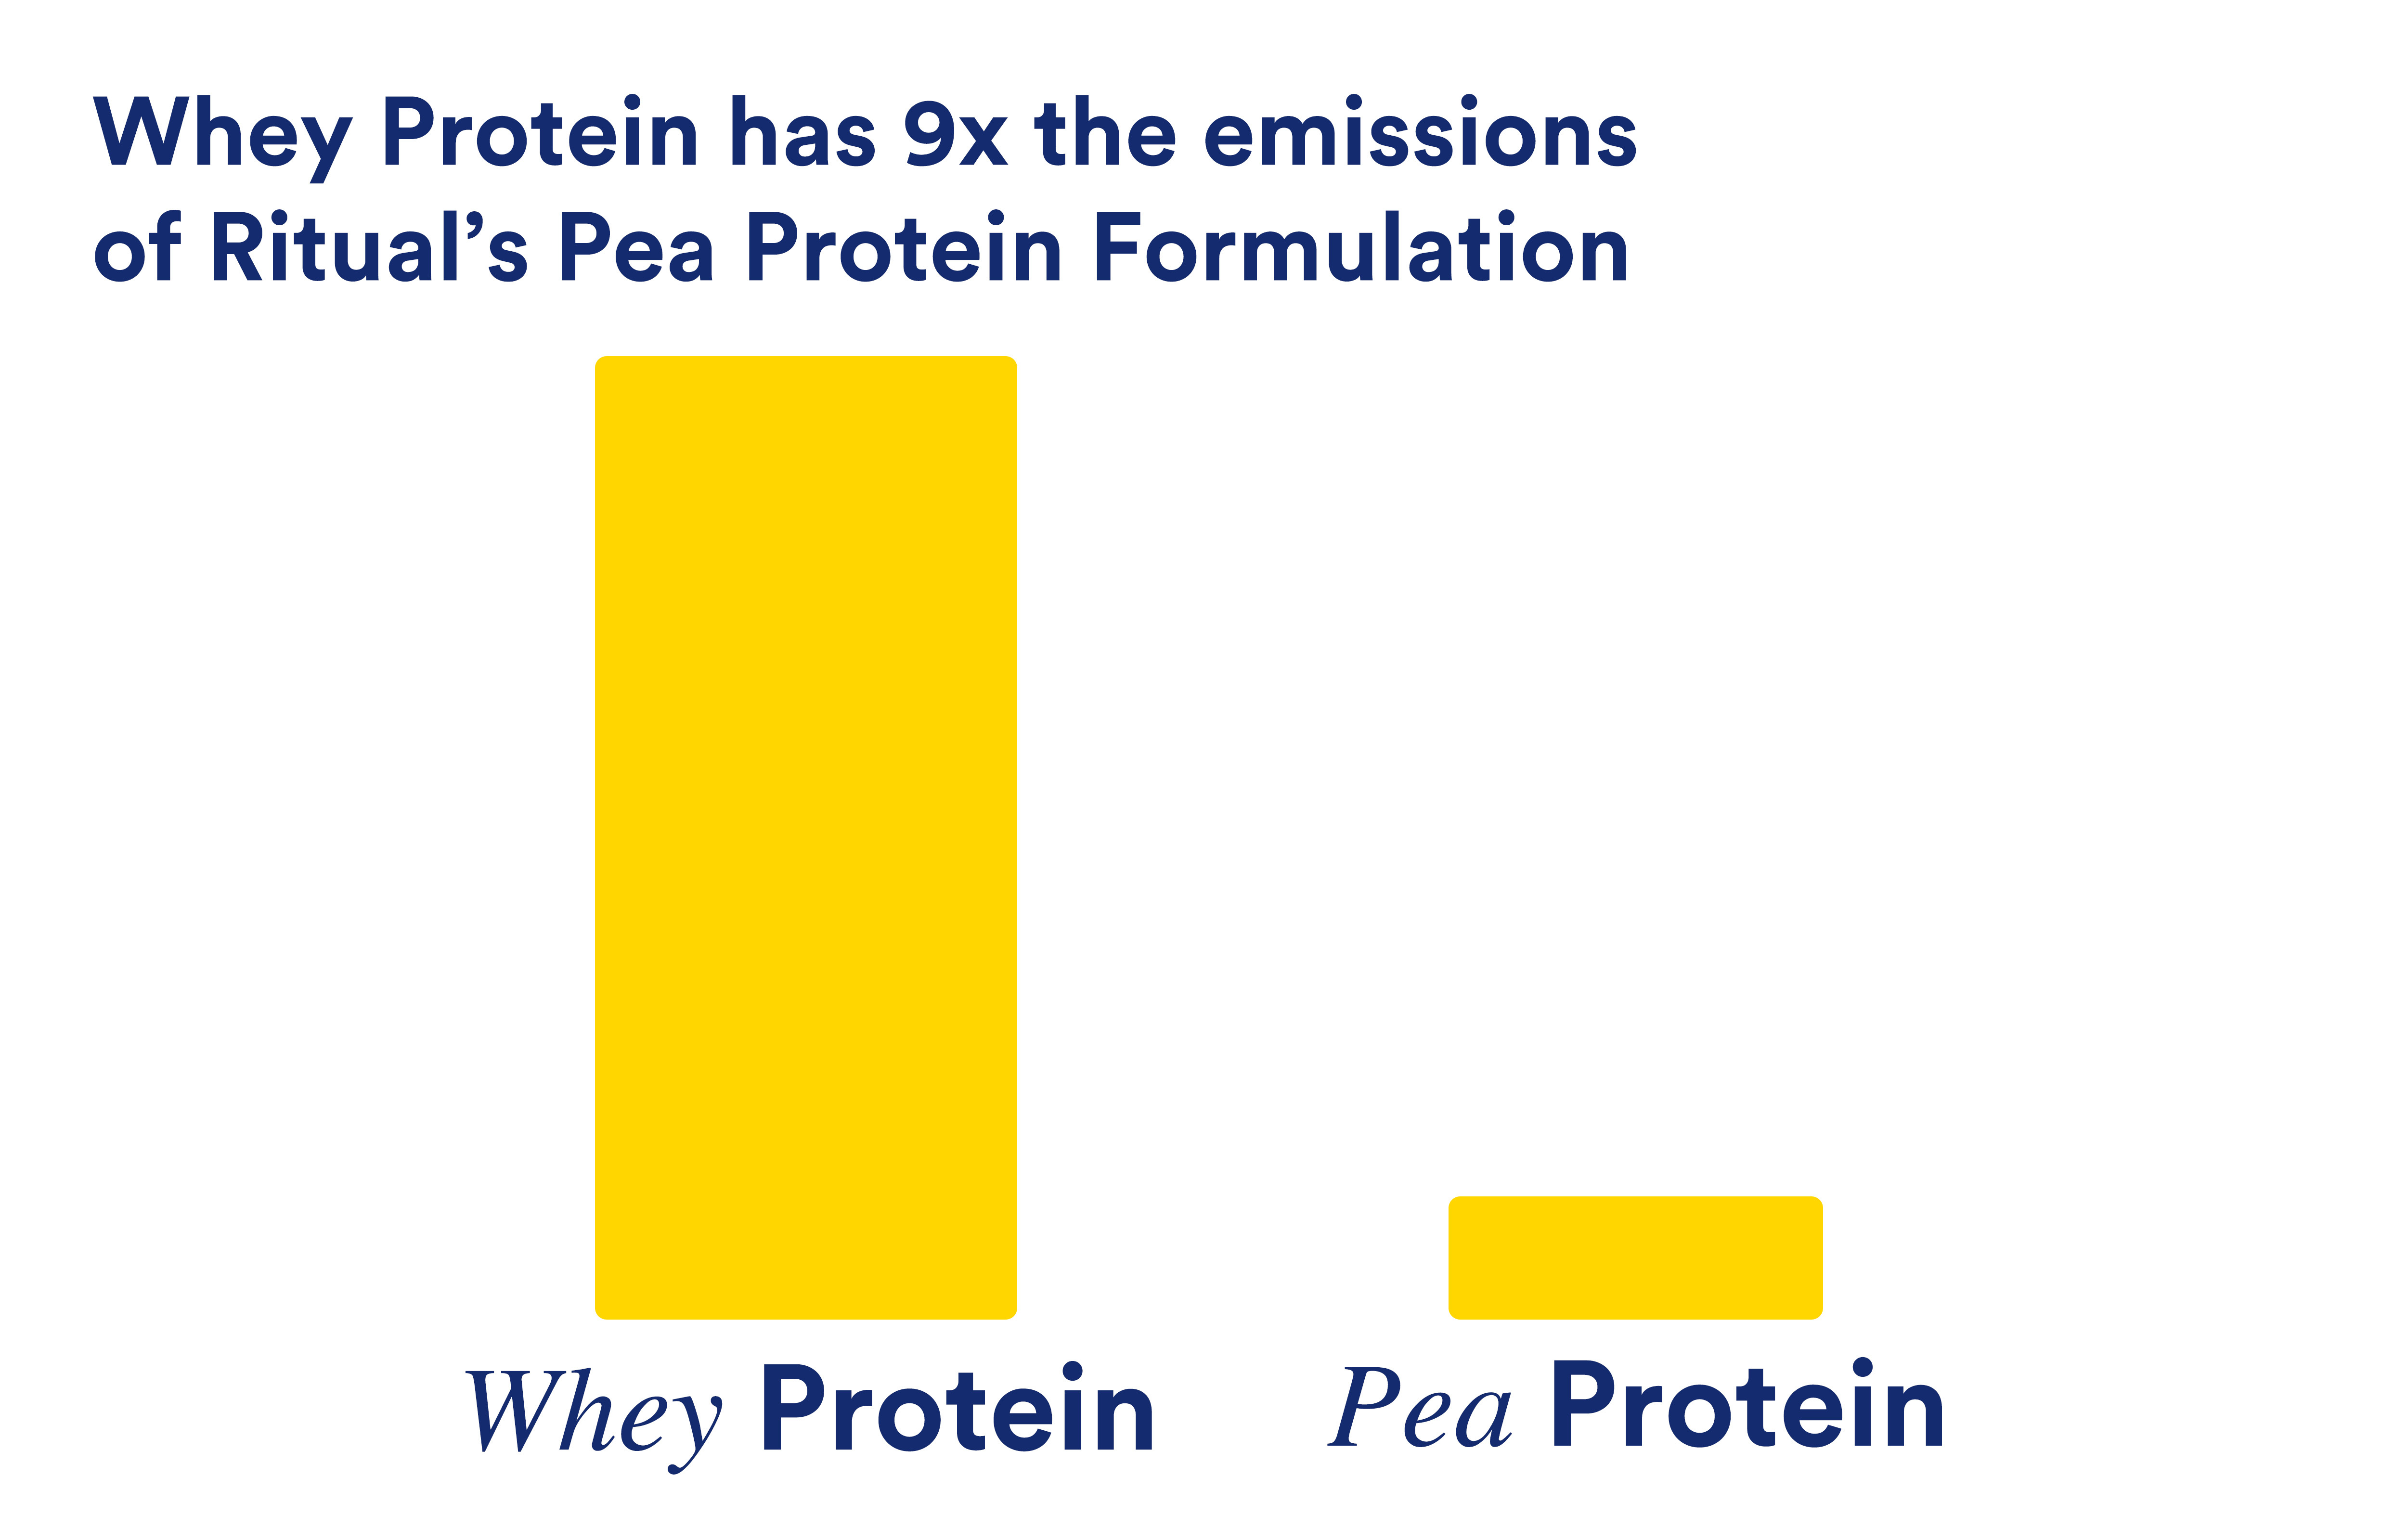 Whey vs pea protein emissions